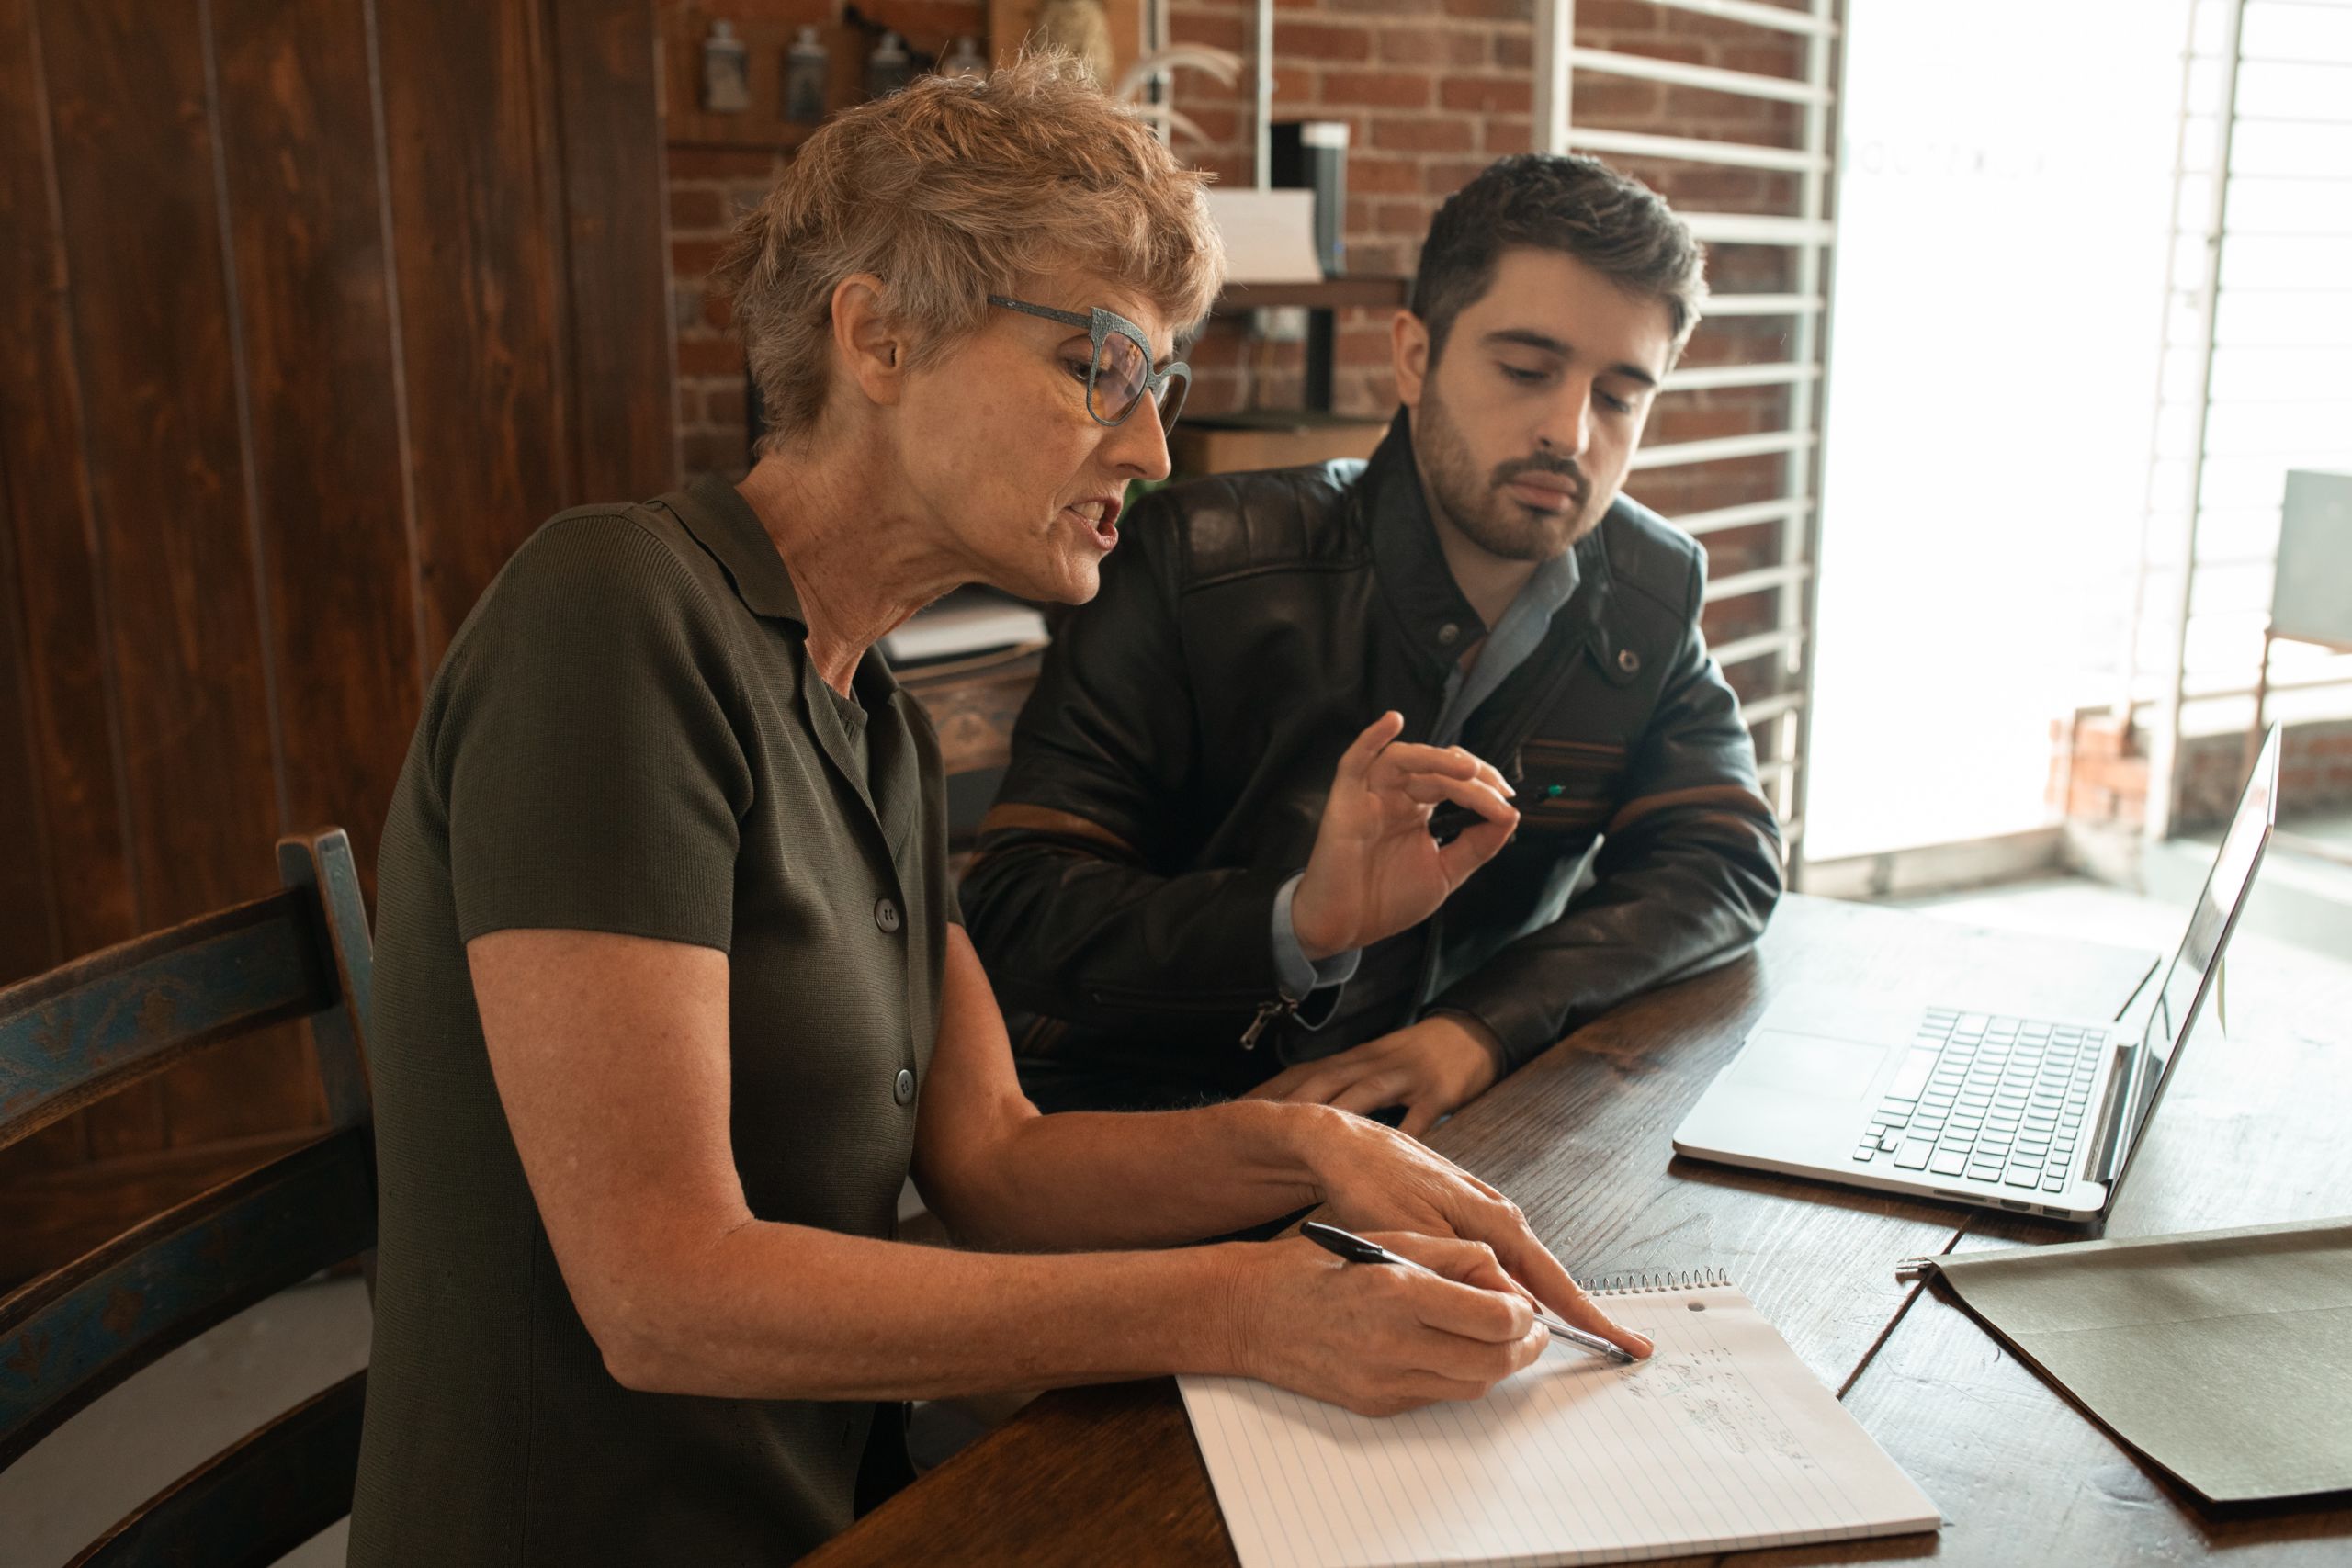 older lady with short hair and glasses talking to a younger guy sitting next to her. She is writting on a peice of paper and the guy next to her is also t.alking and has a laptop in front of him